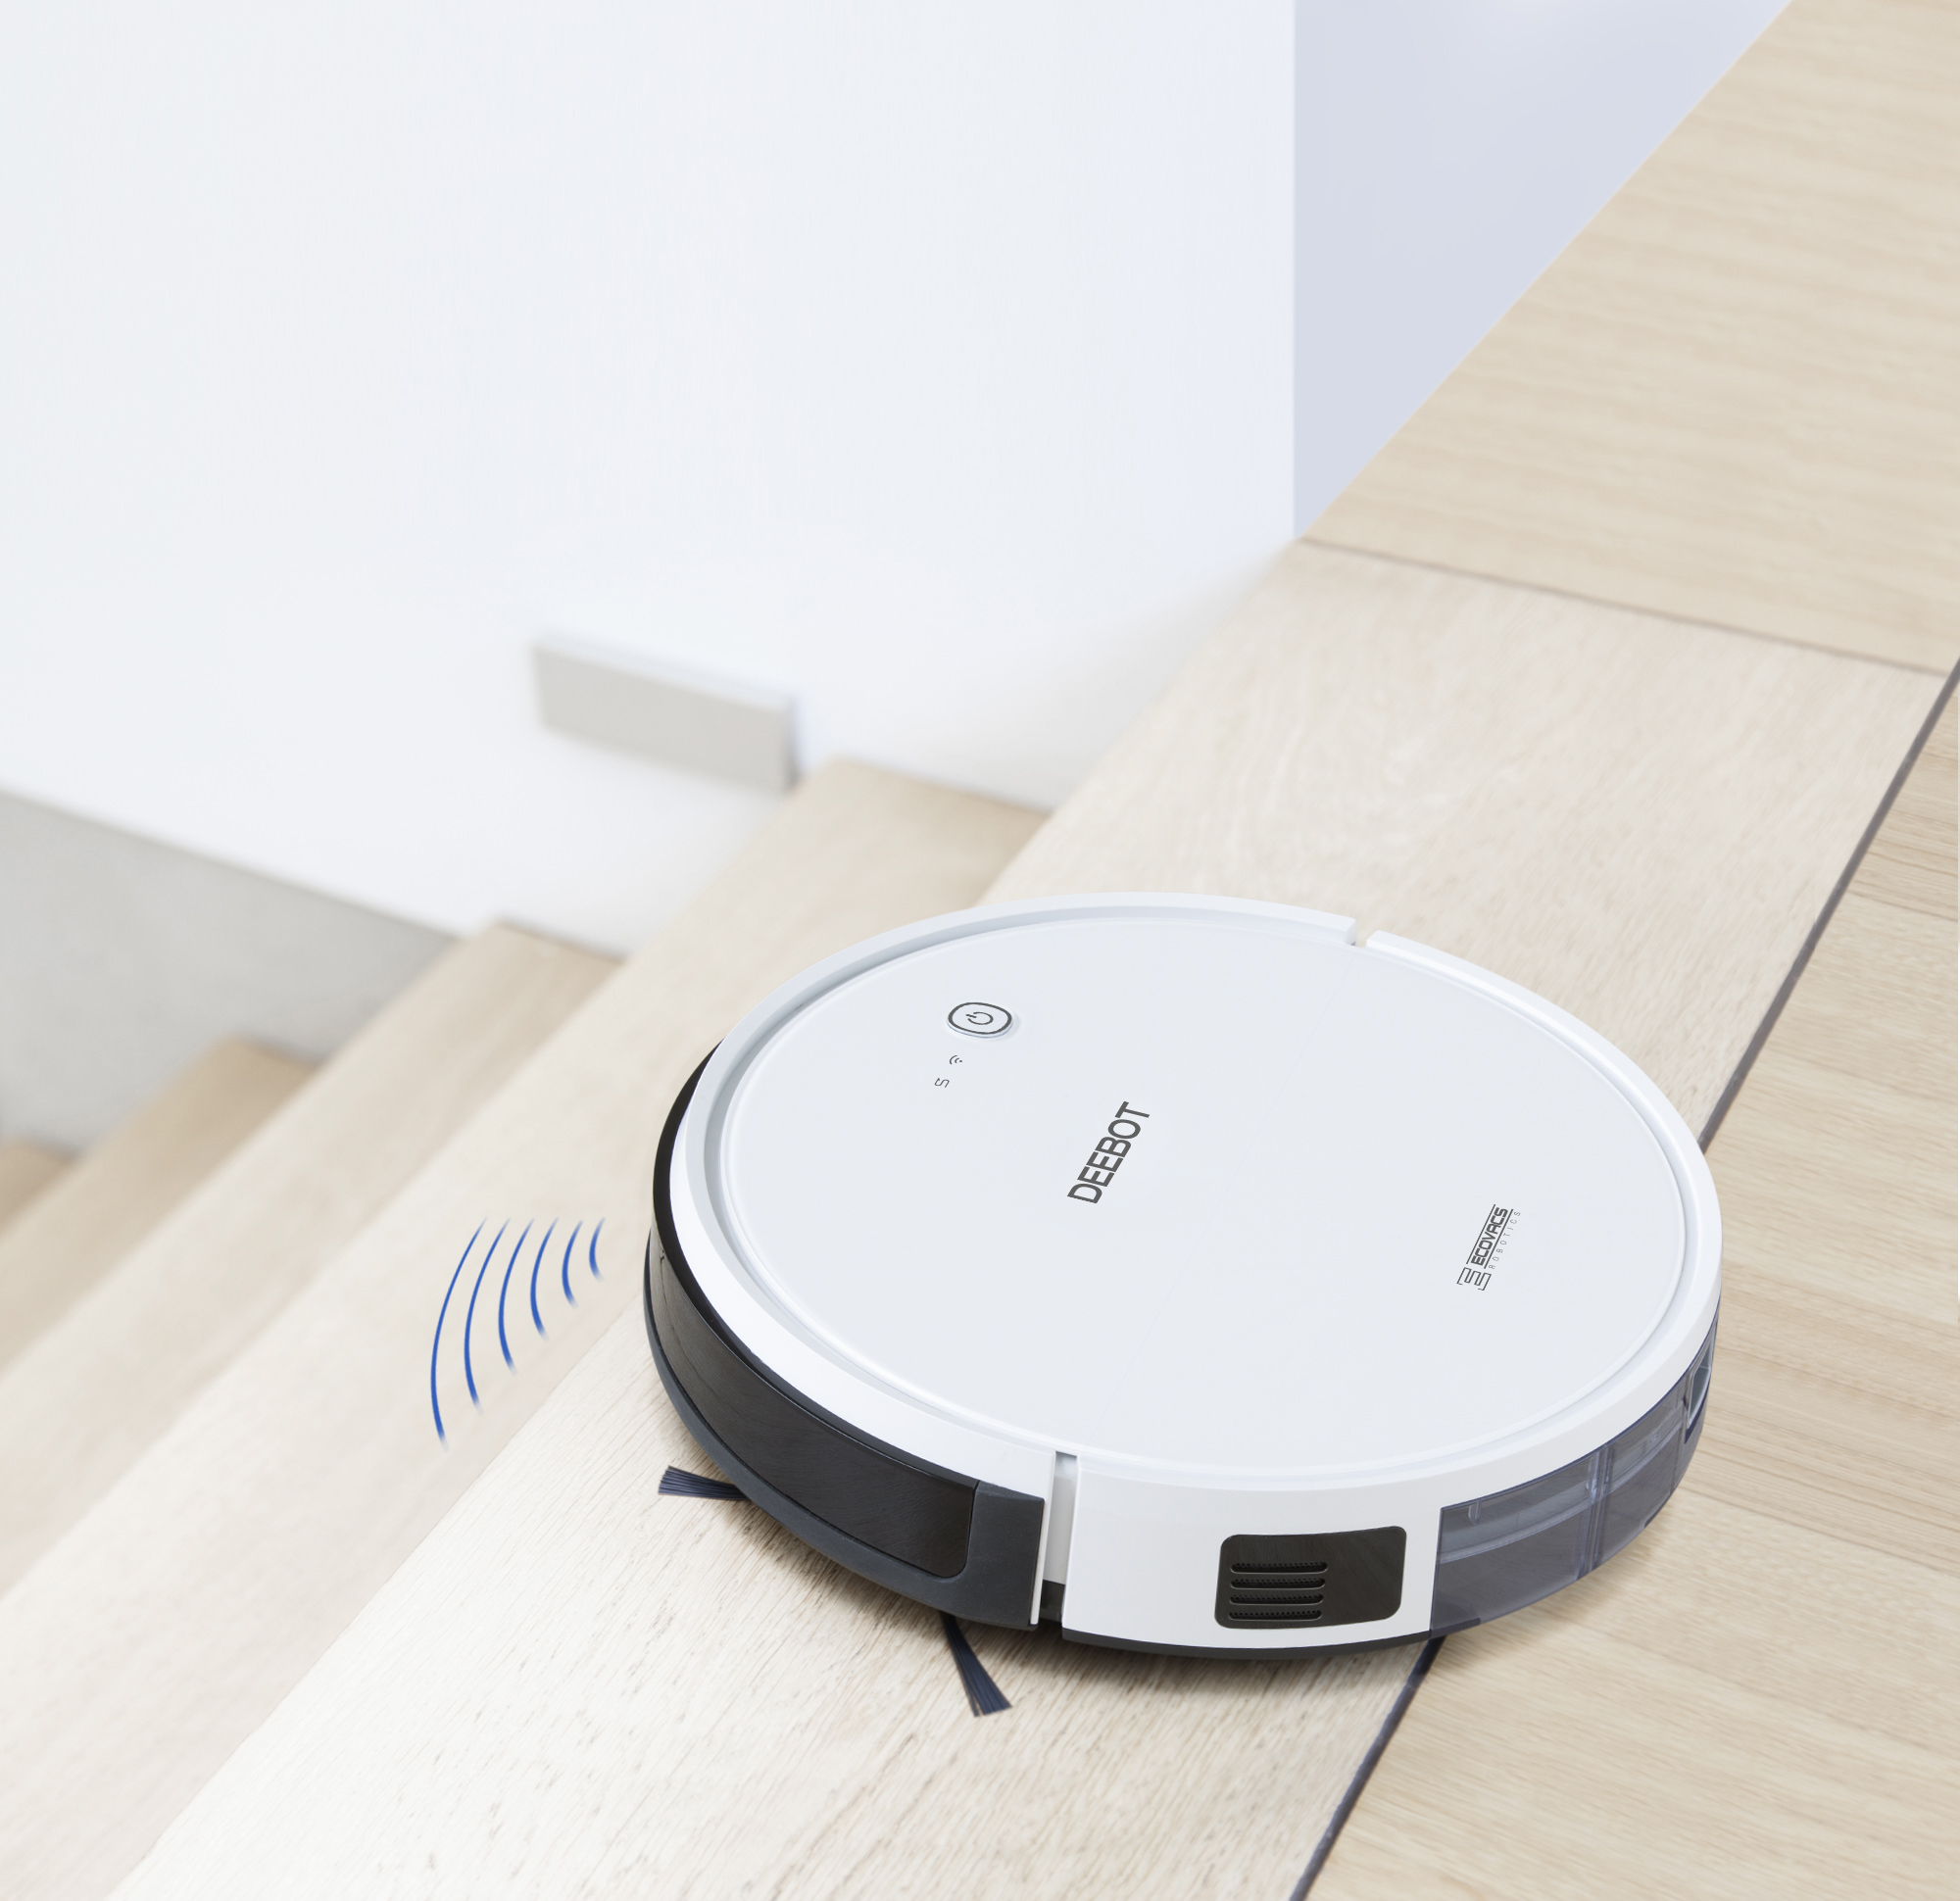 ECOVACS DEEBOT 600 Wi-Fi Connected Robot Vacuum - image 5 of 6